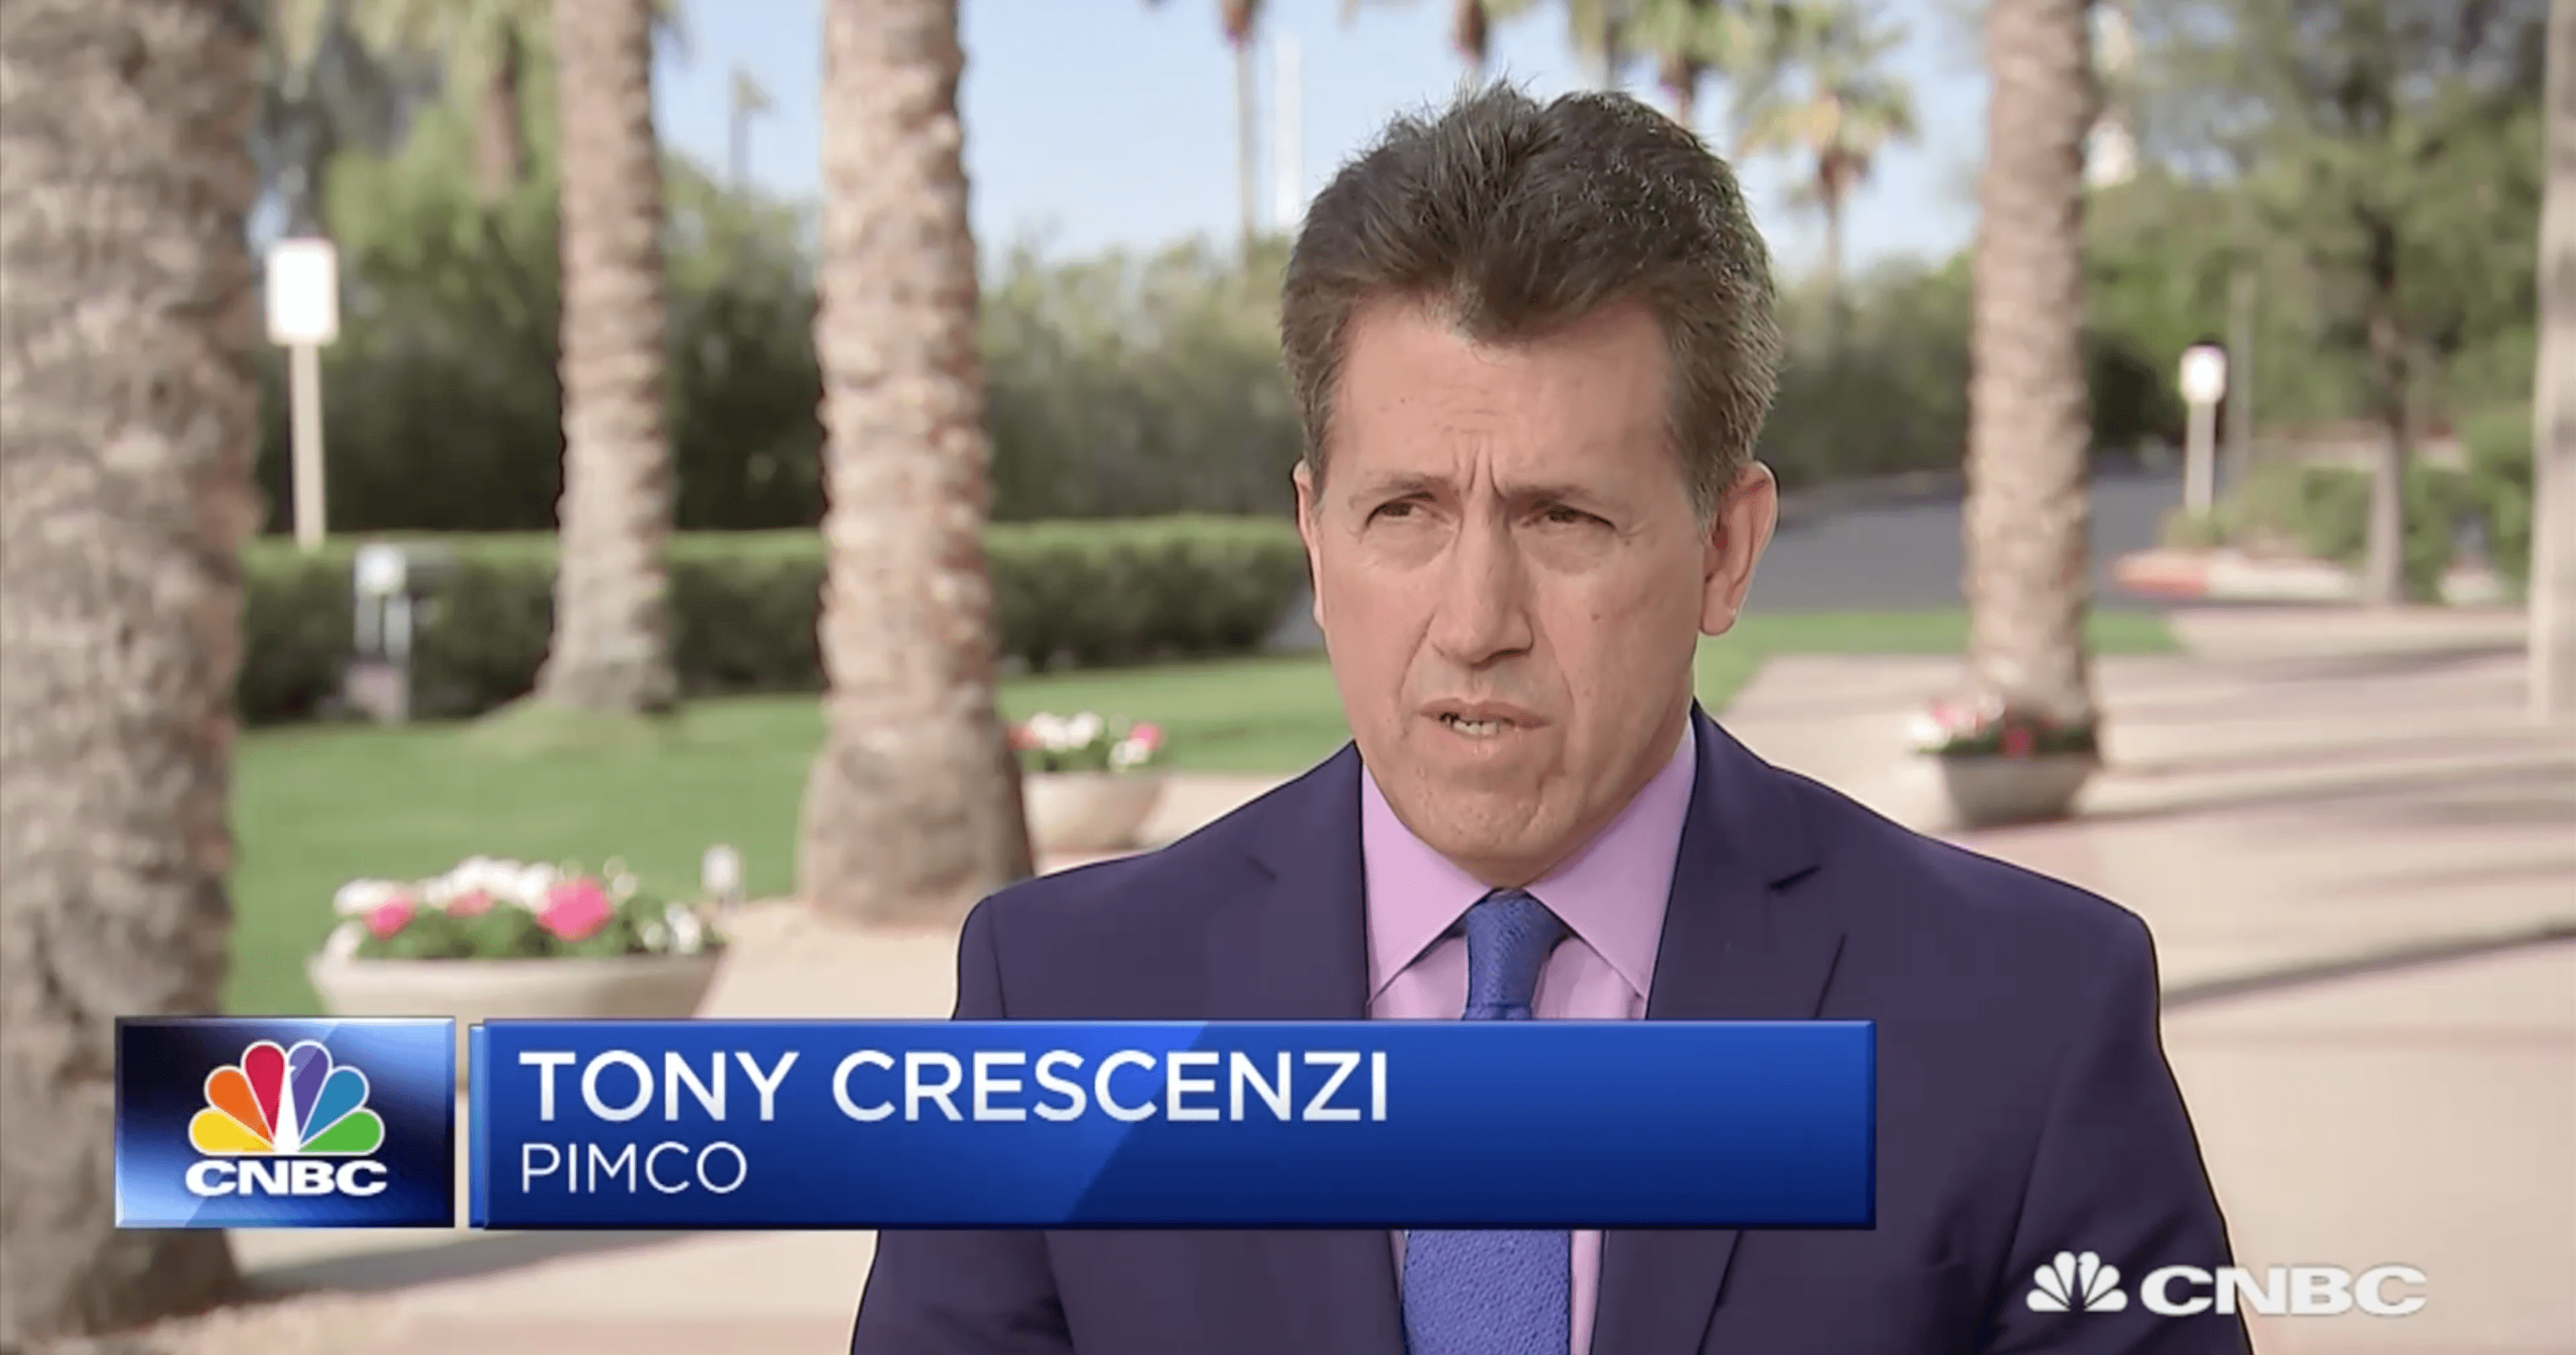 TIGER 21 ANNUAL CONFERENCE: CNBC INTERVIEW WITH TONY CRESCENZI ON THE IMPACT OF CORONAVIRUS ON GLOBAL MARKETS